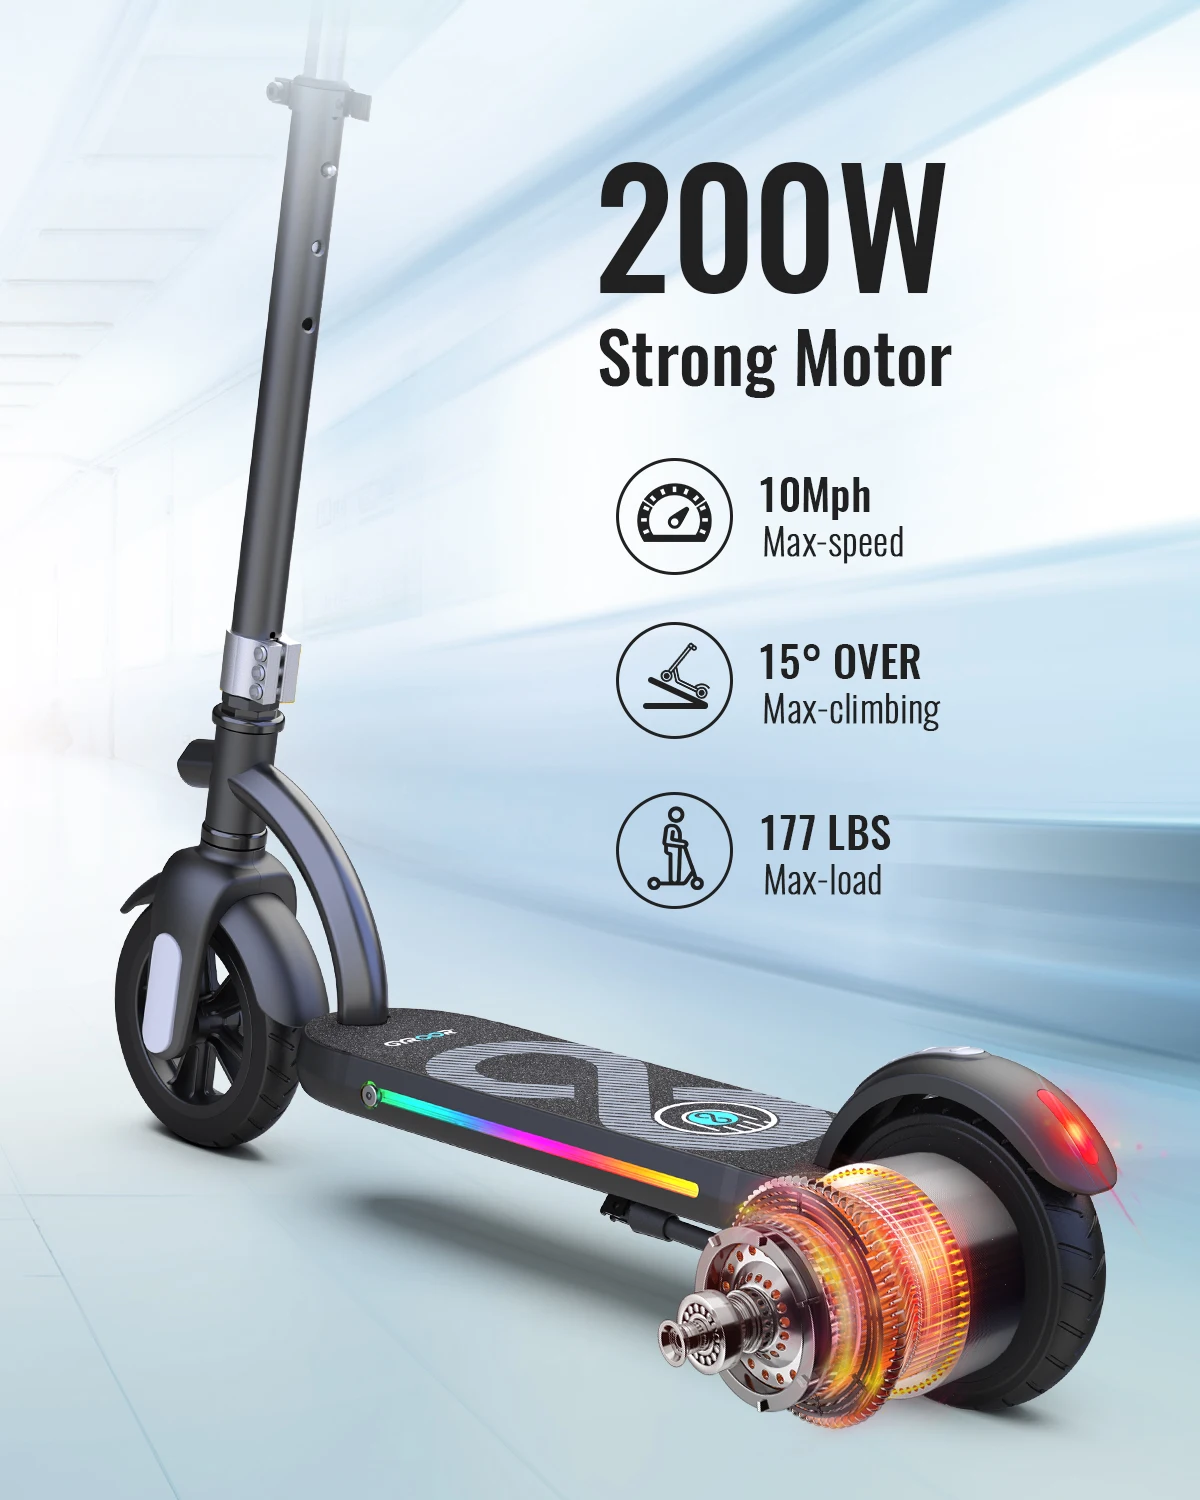 Gyroor 120w 6.5 inch children 2 wheel electric scooter safety electric scooter for kids portable balance scooter electric scoote